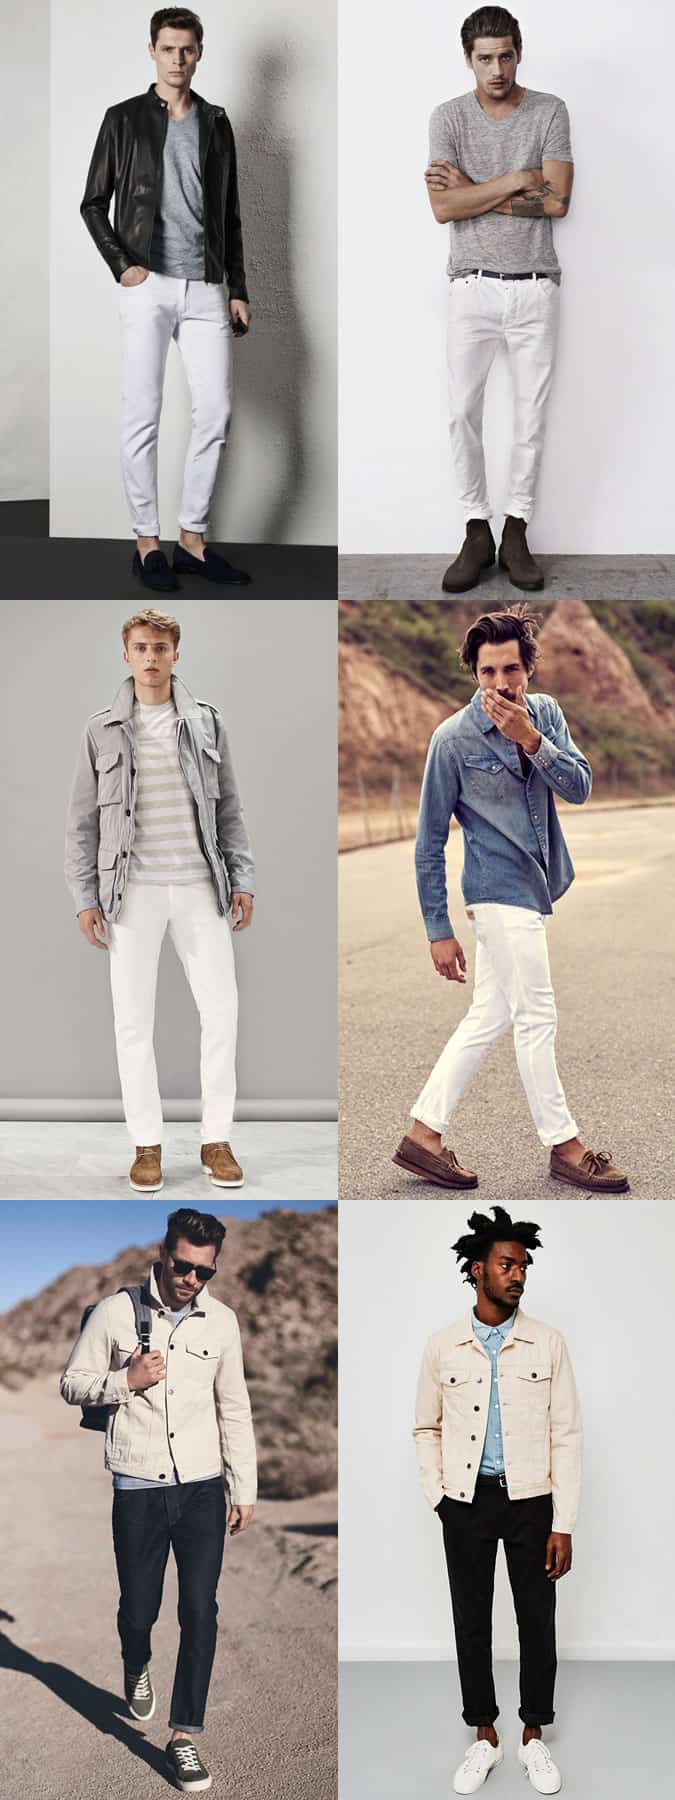 What color jeans with grey shirt